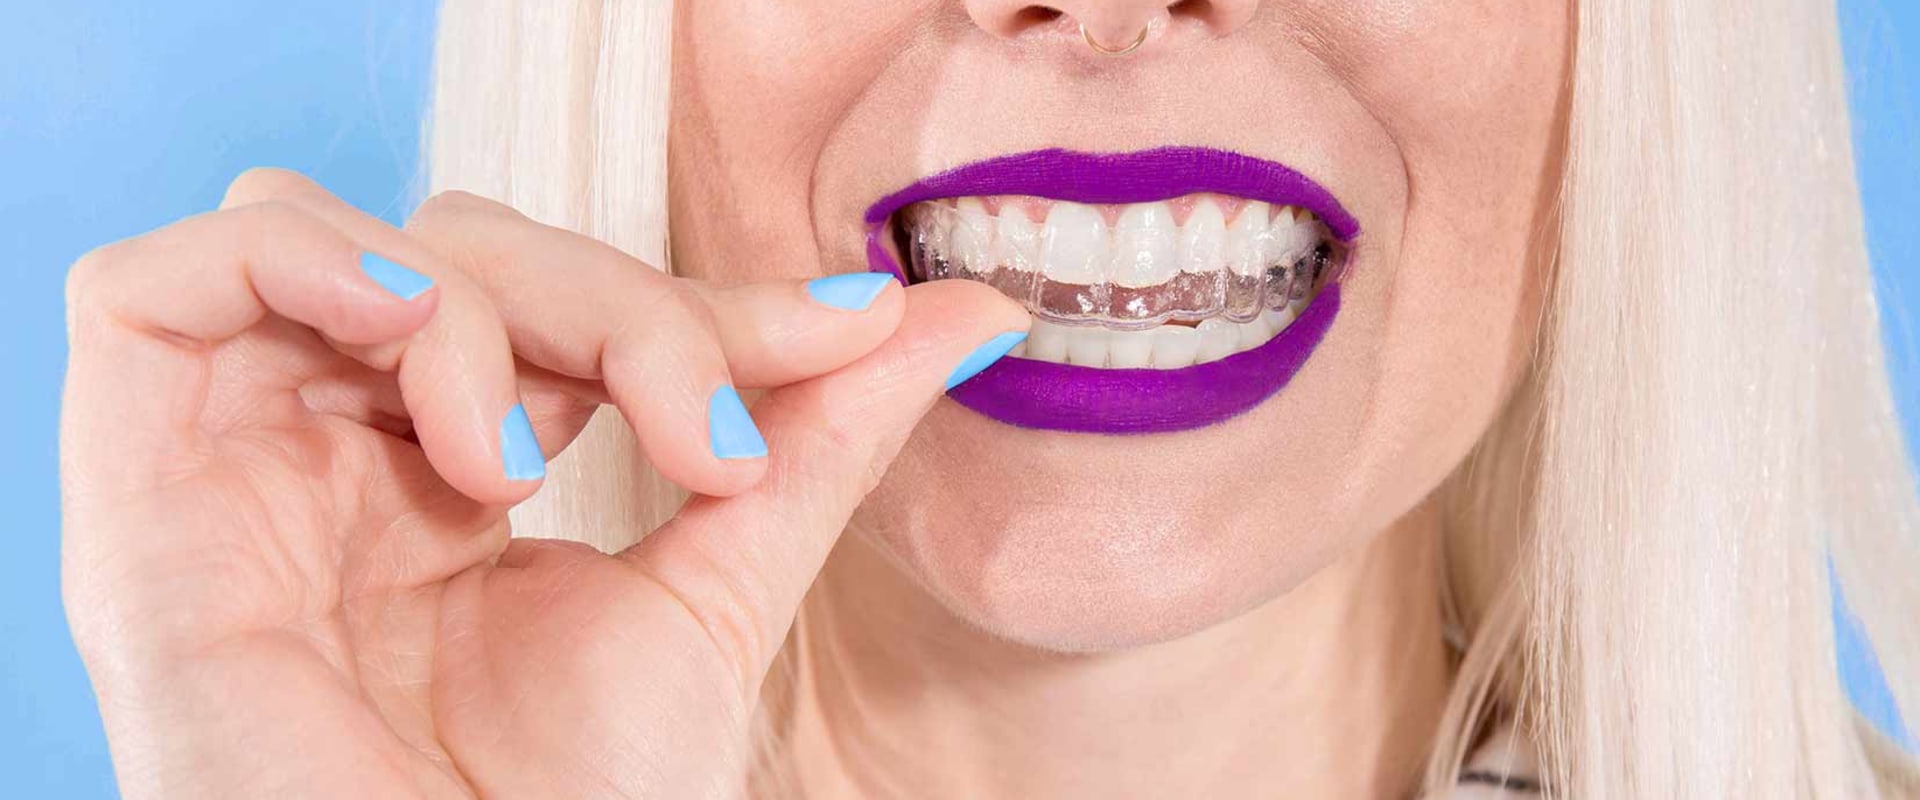 Which company owns invisalign?